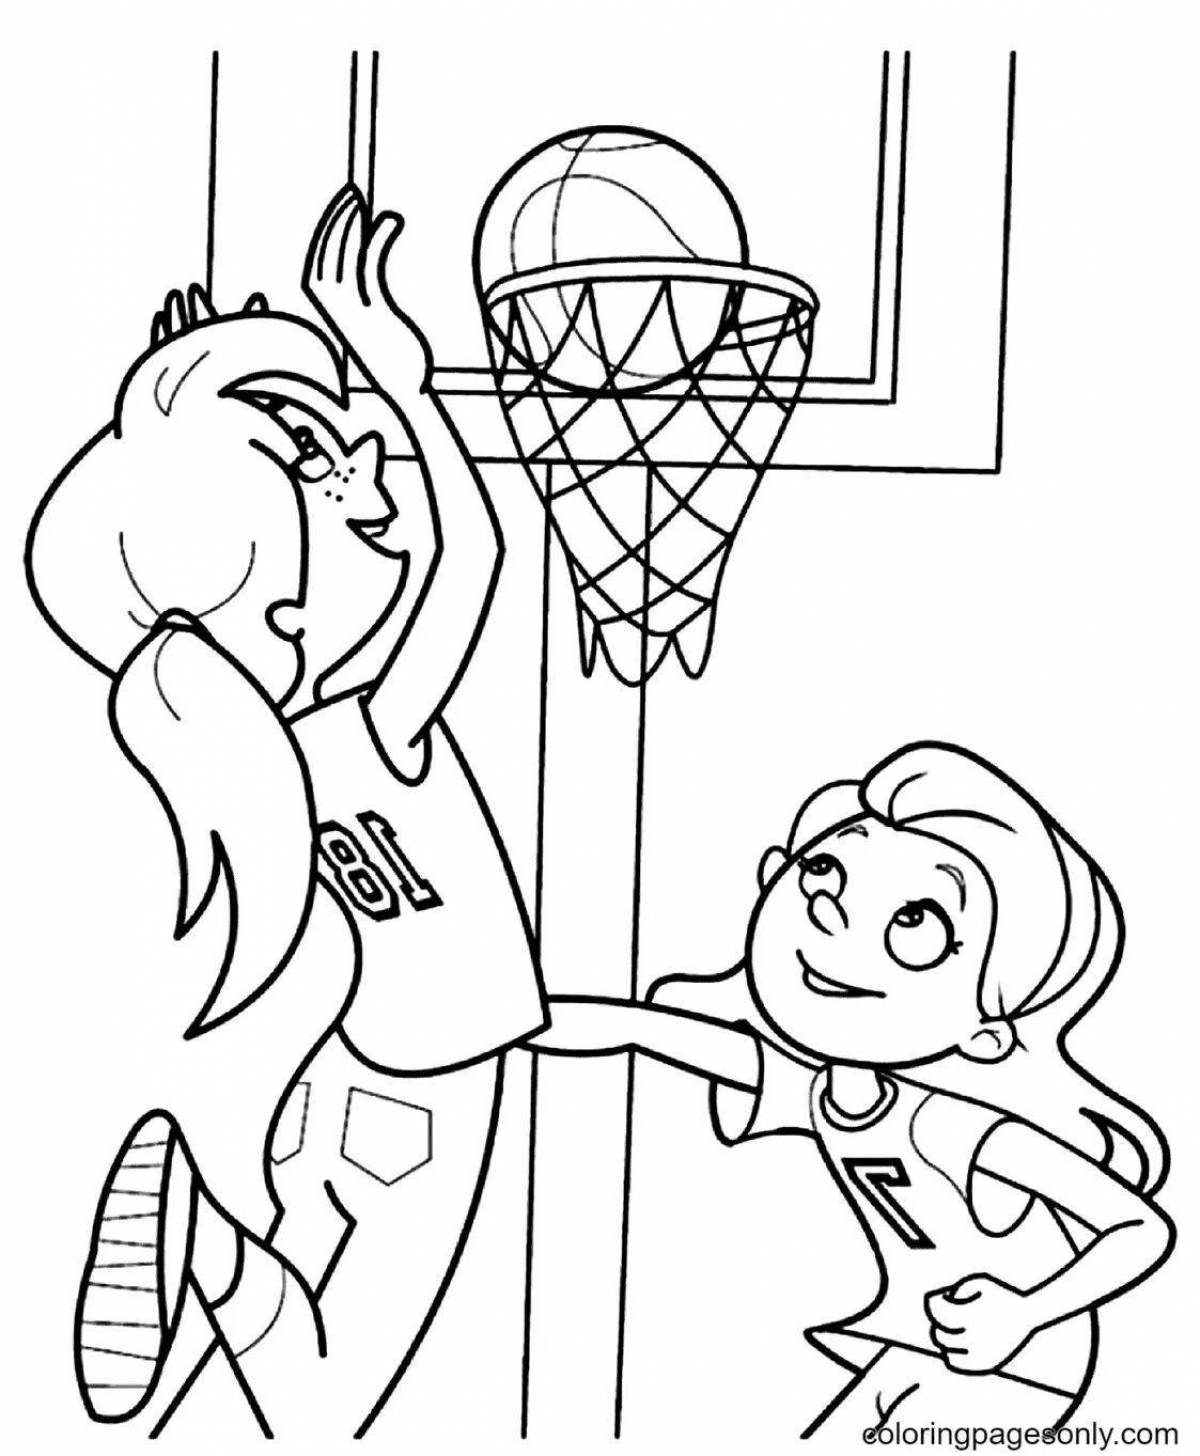 Sam and Sue playful coloring page